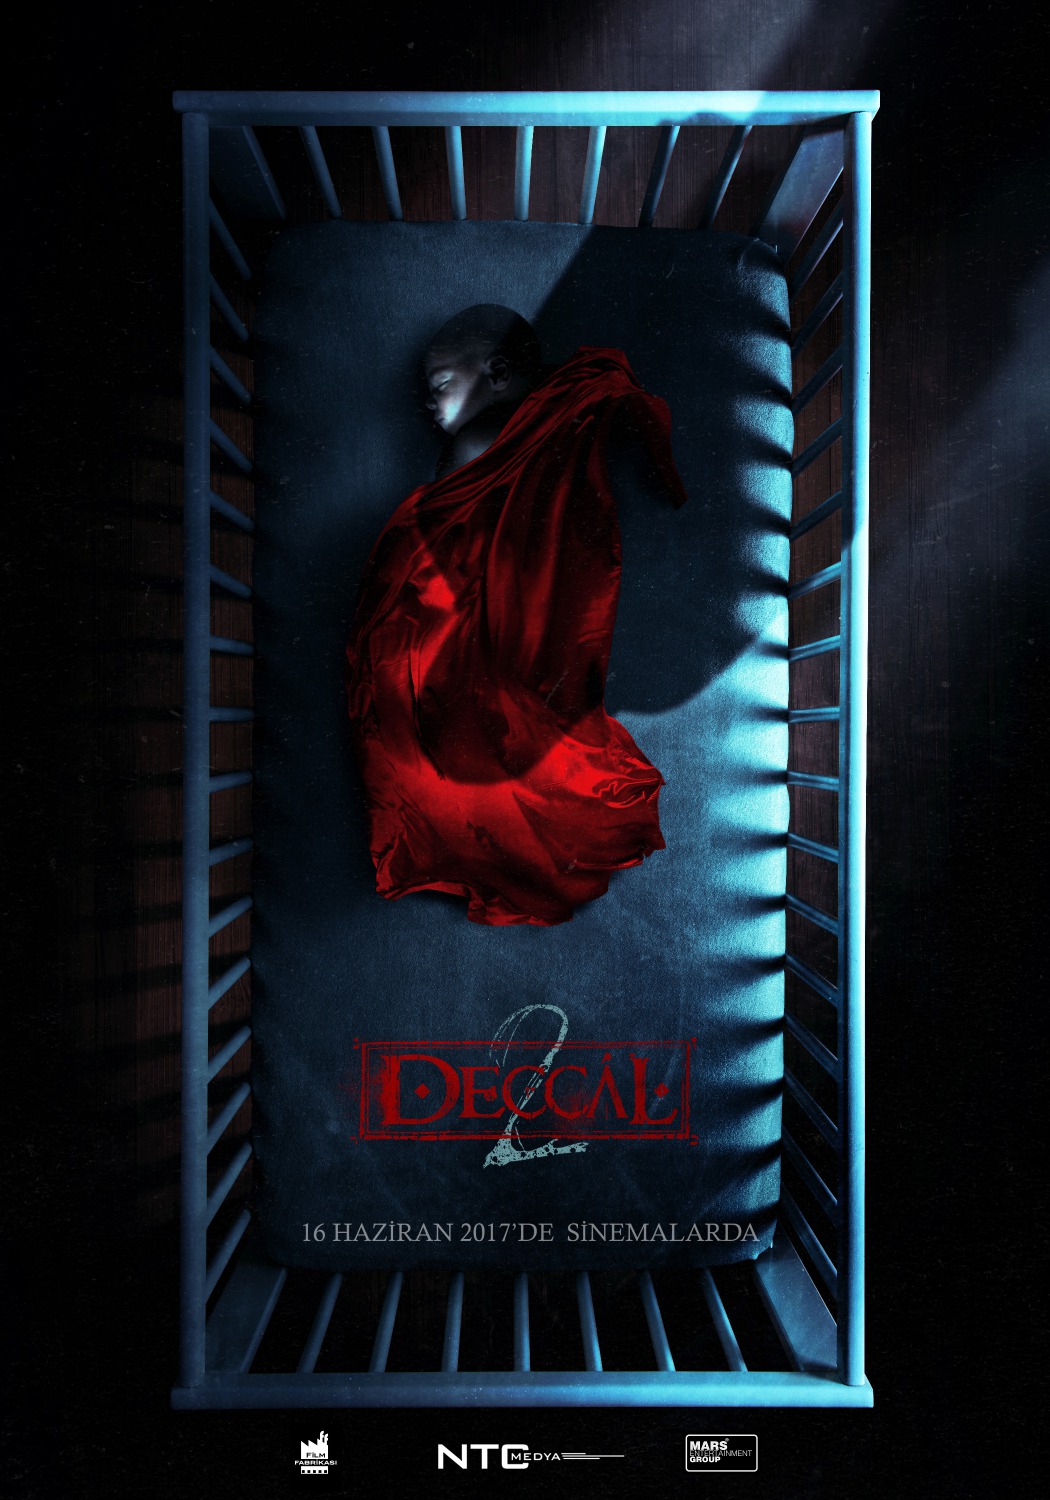 Extra Large Movie Poster Image for Deccal 2 (#1 of 5)